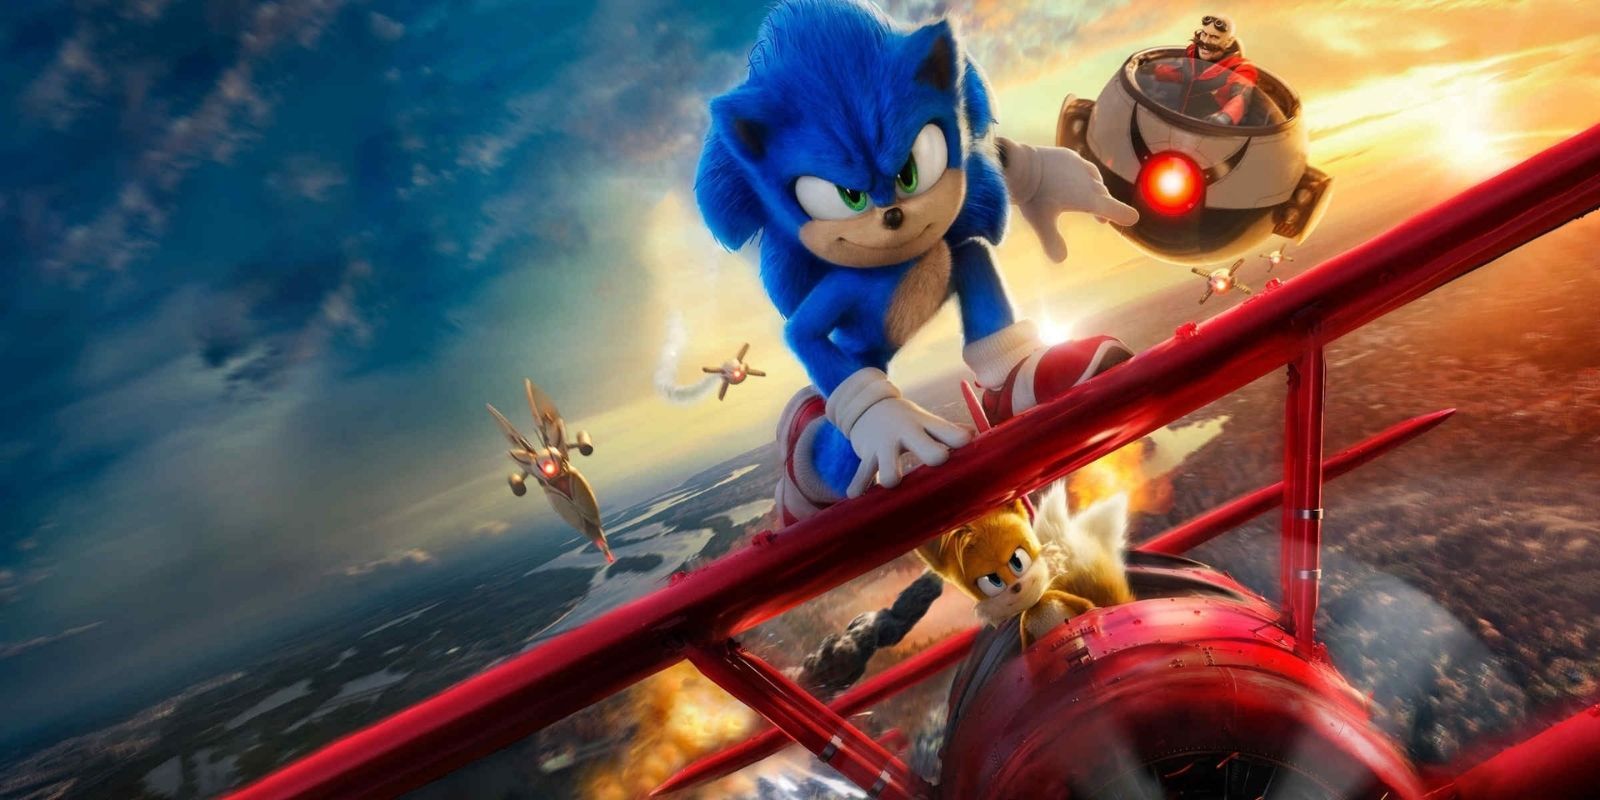 The Best And Worse Case Scenarios For The Sonic Movie Sequel